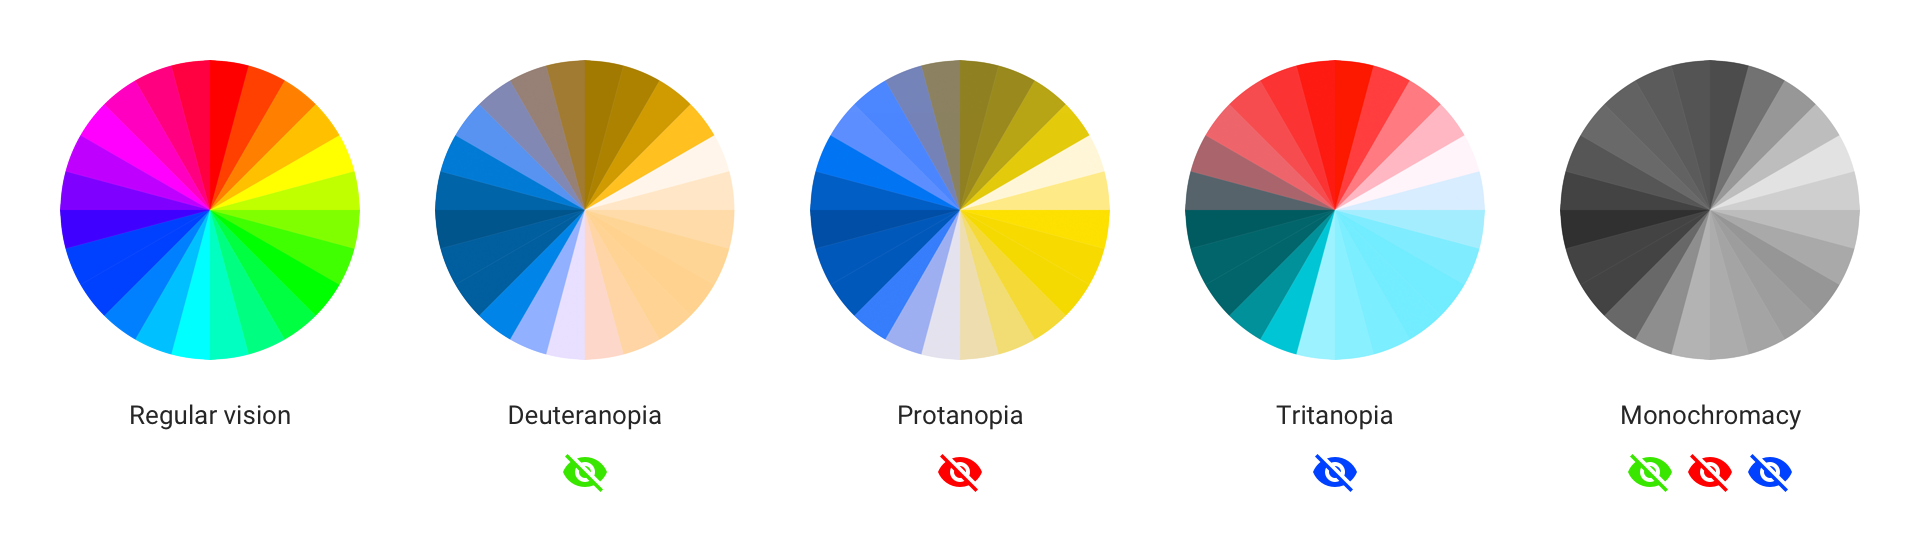 A color wheel highlighting complementary colors for regular vision, deuteranopia, protanopia, tritanopia and monochromacy